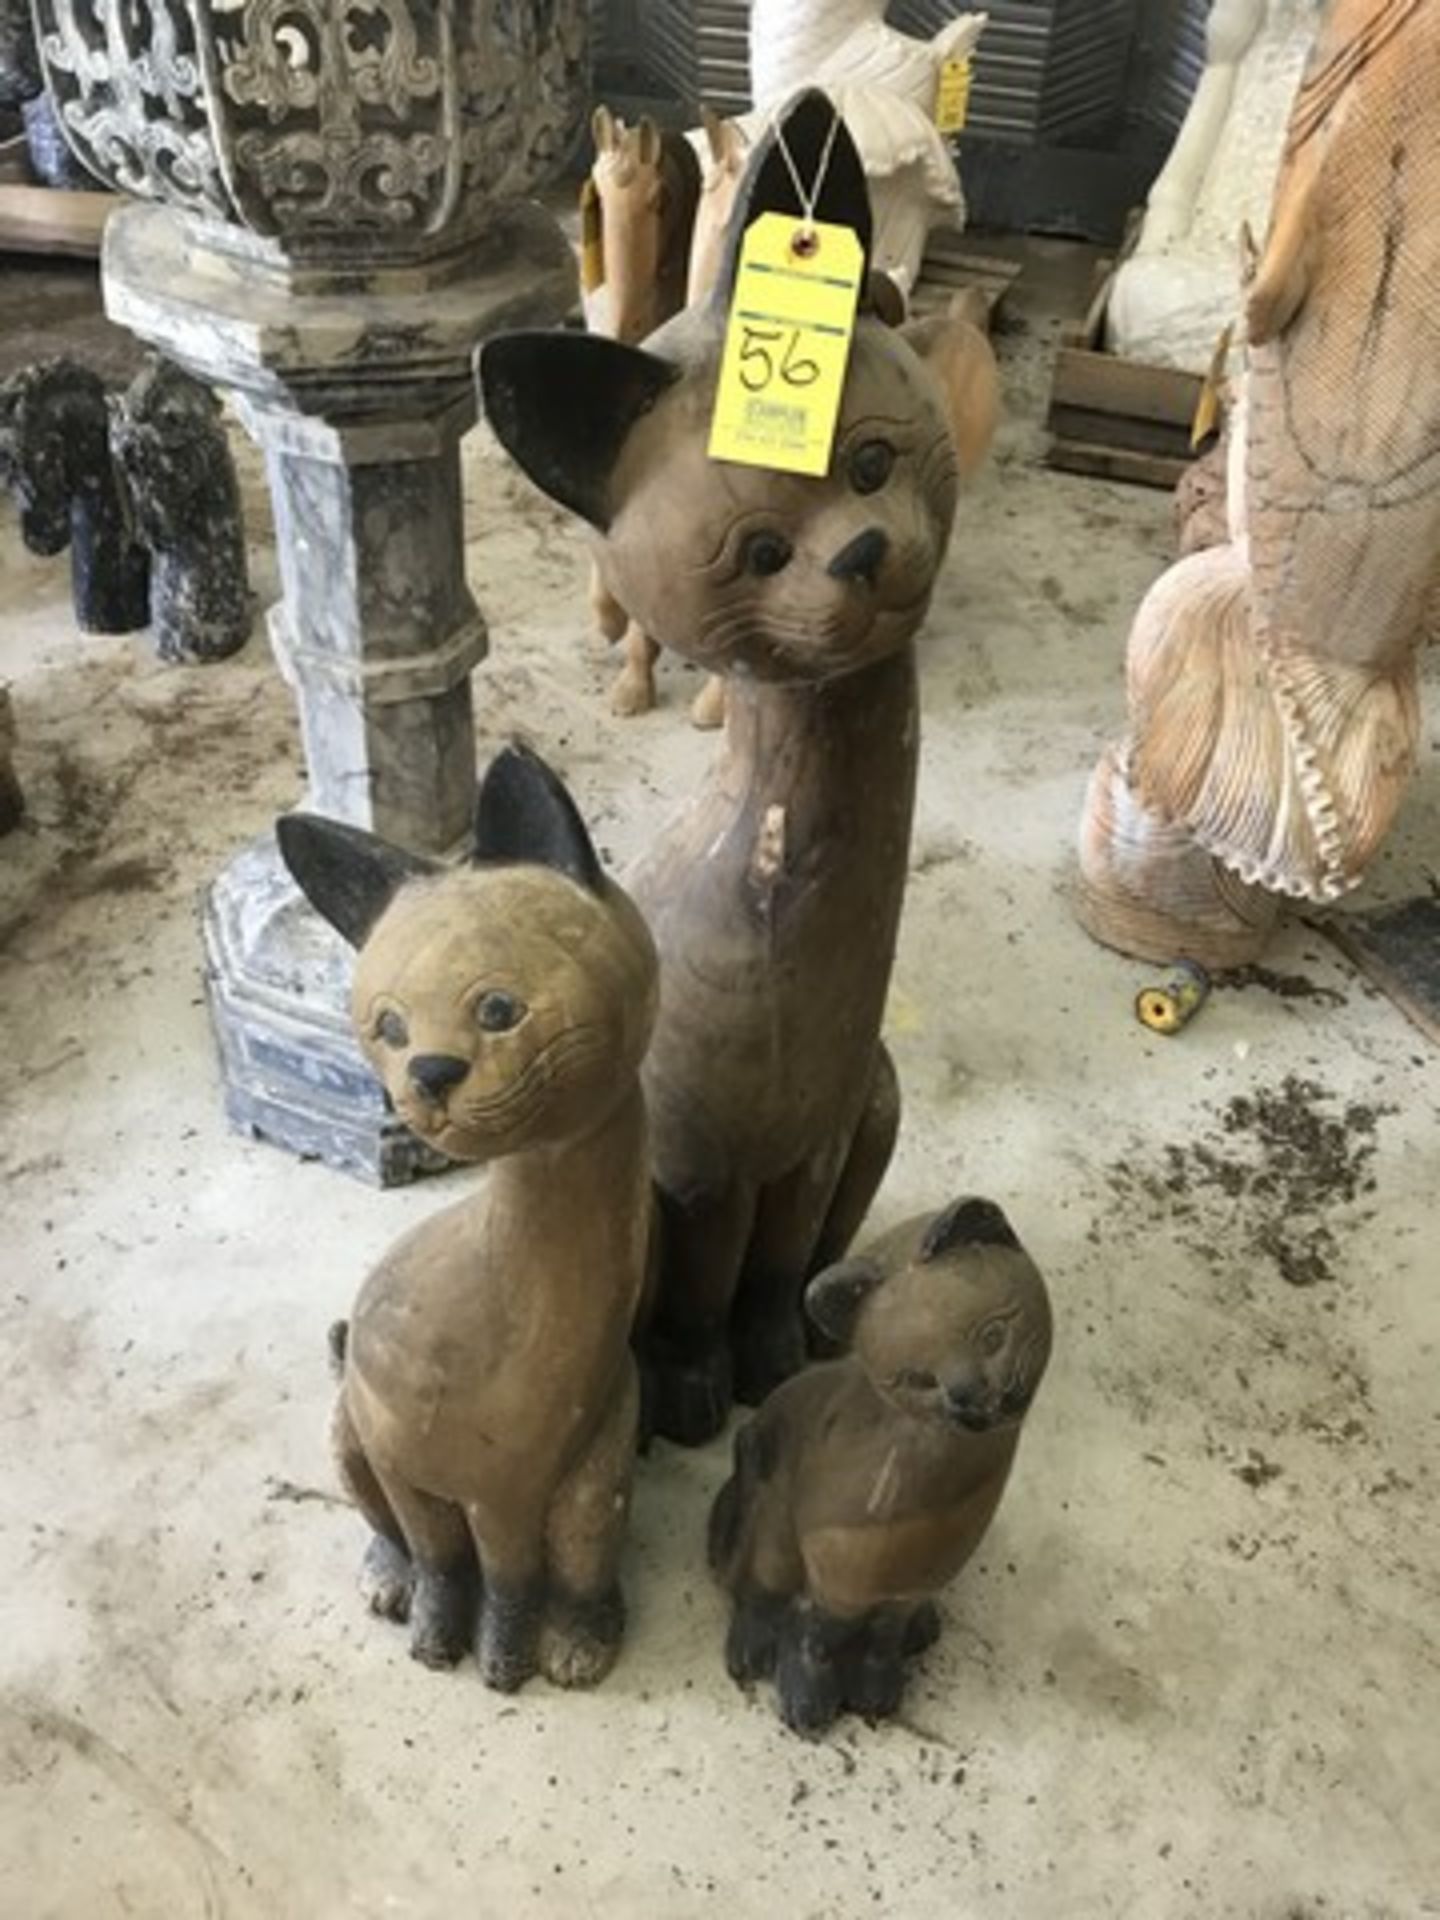 CARVED WOOD STATUES - CATS - 1- 40''H / 1- 30''H / 1- 20''H (FOB LOXAHATCHEE, FL)